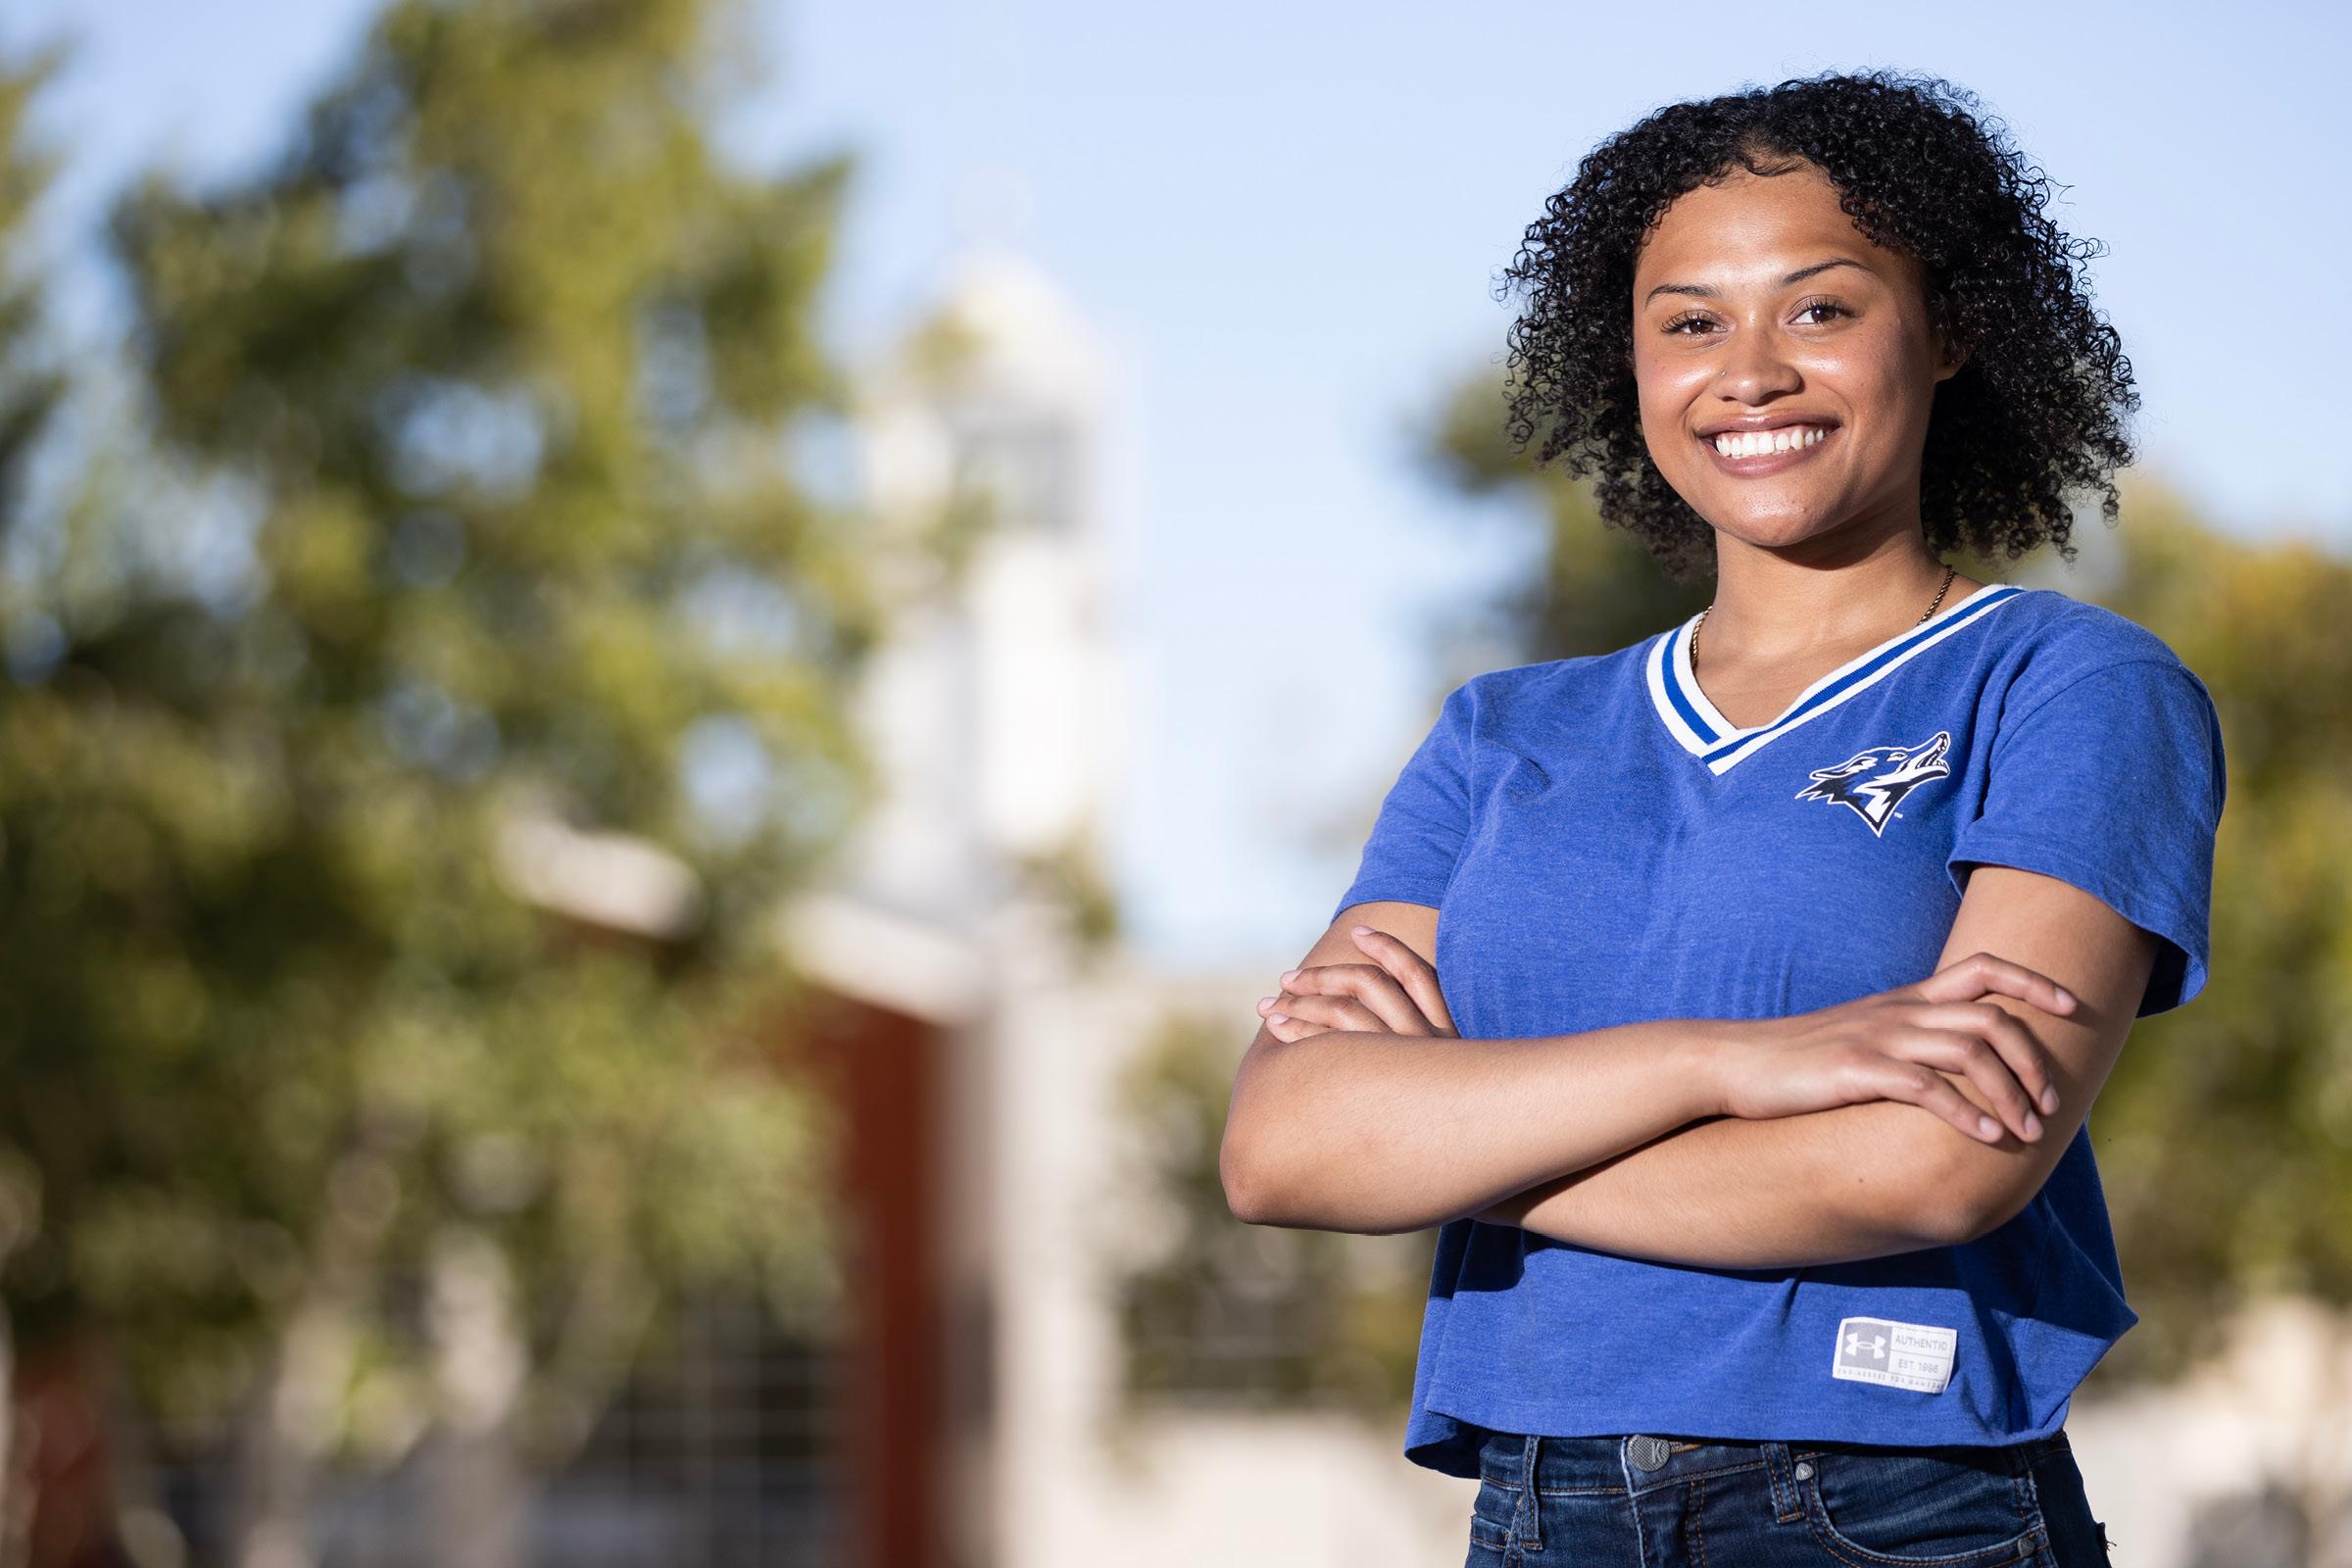 Alyssa Smith, student of CSUSB's Department of Information Systems and Technology